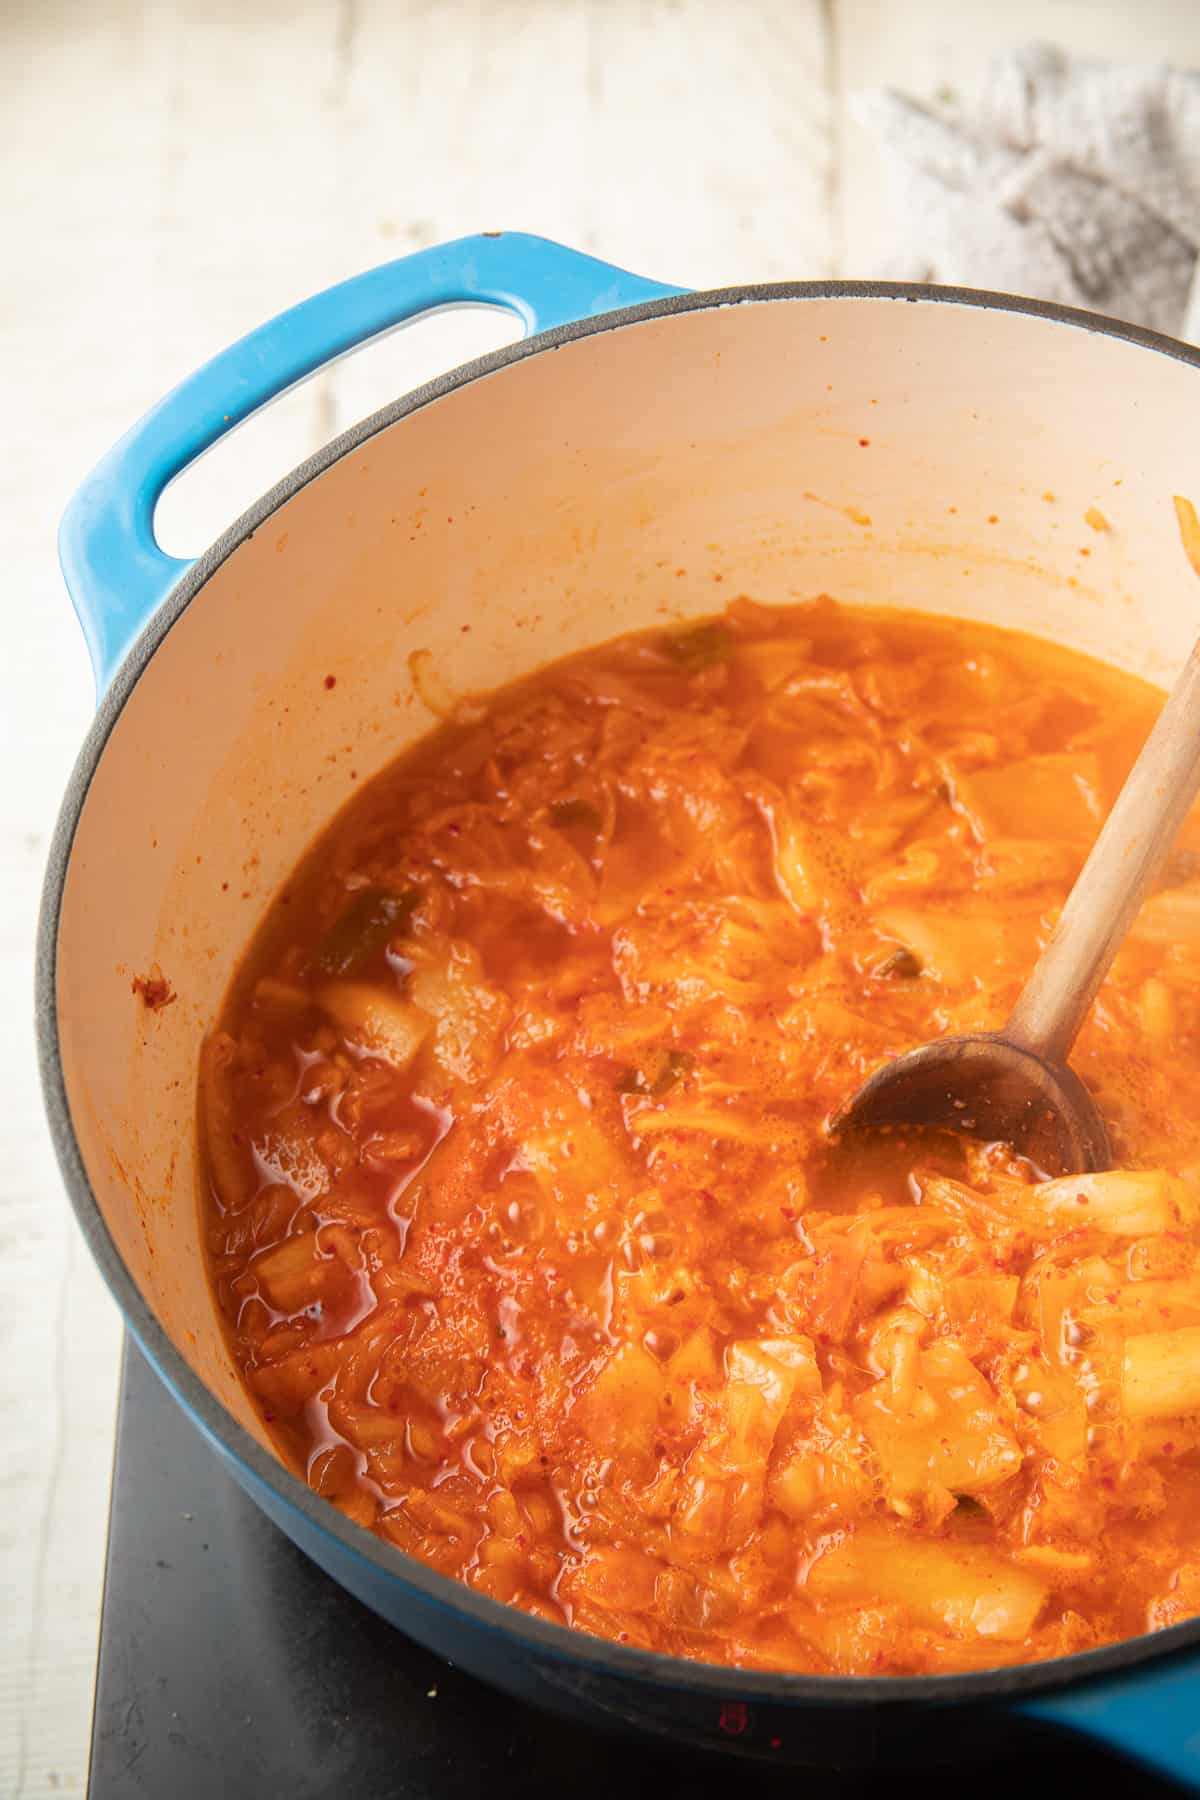 Kimchi simmering in broth in a pot.